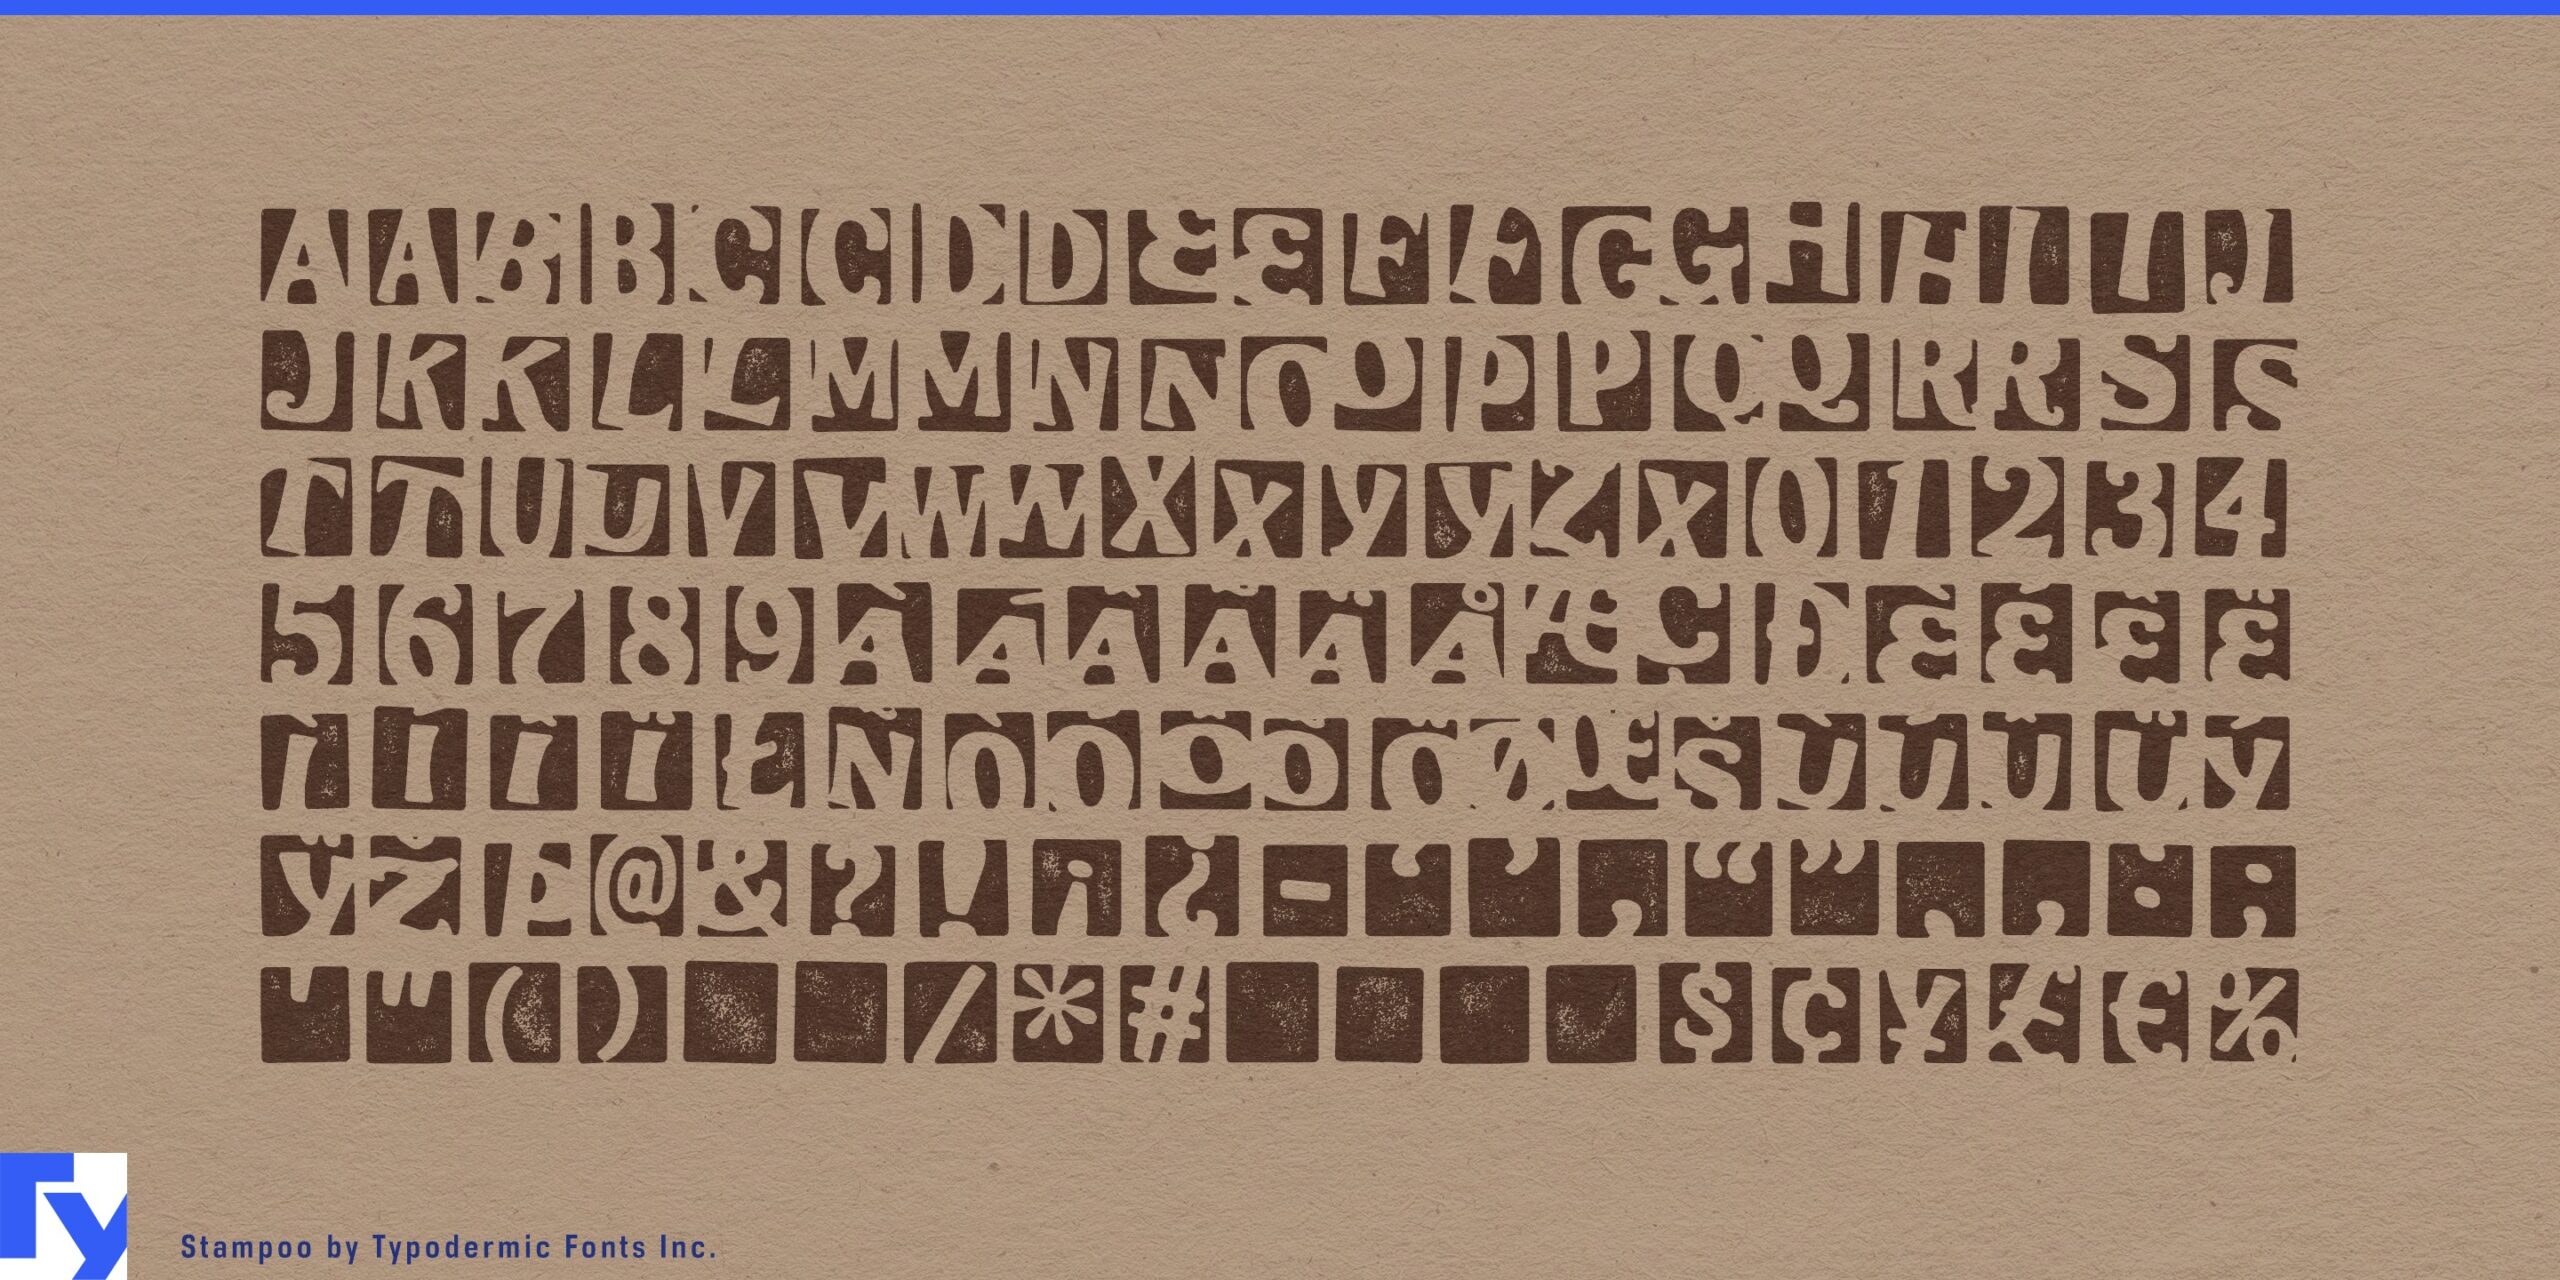 Feel the warmth and kindness of Stampoo's unique letterforms in your words.